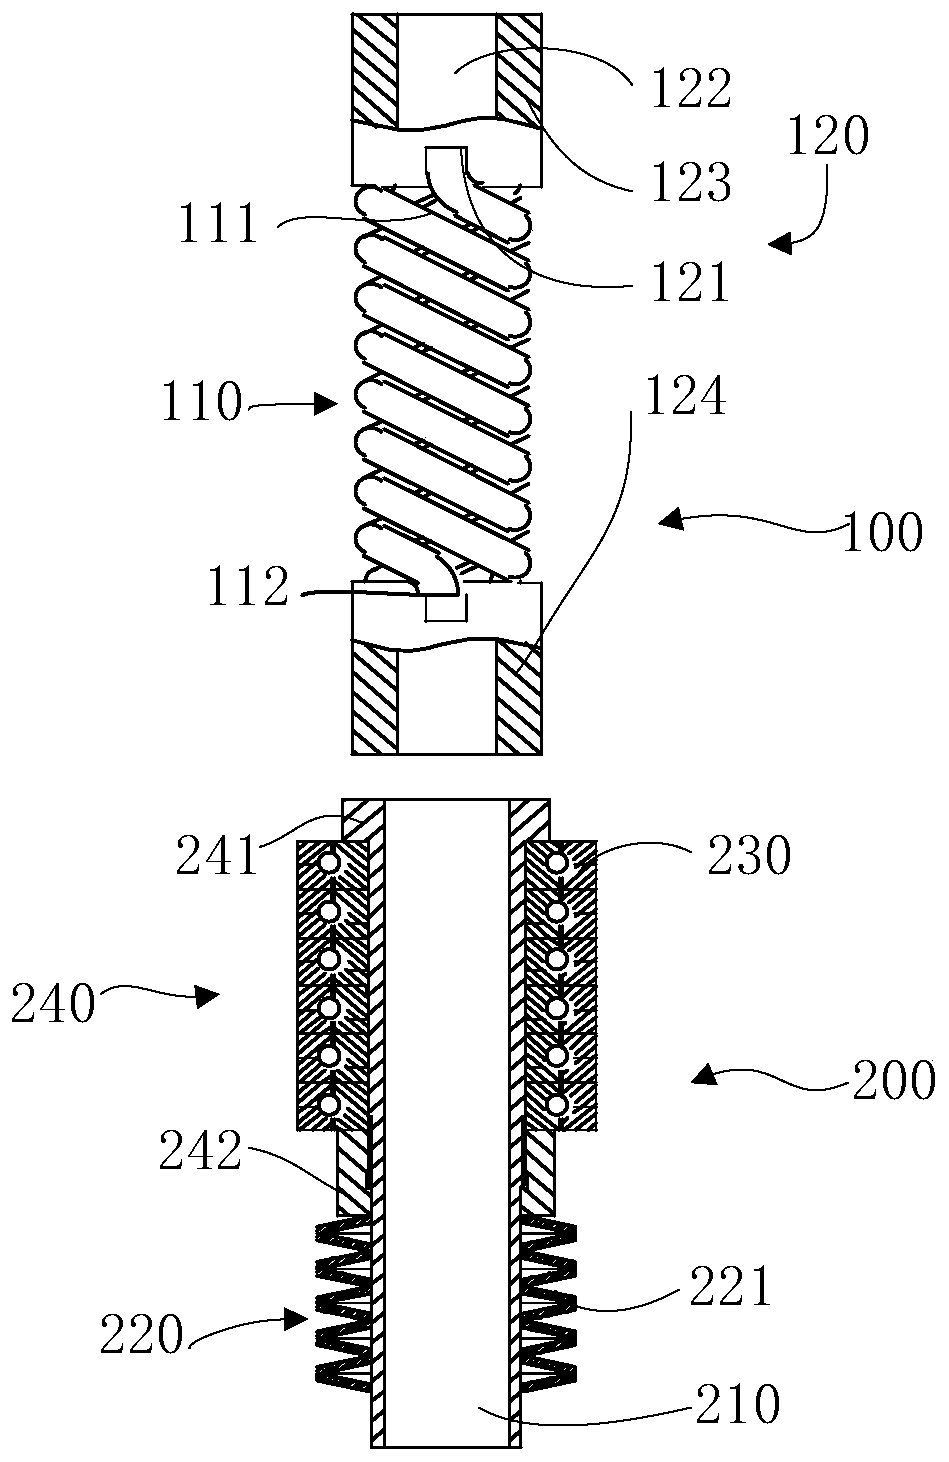 A drilling speed increasing mechanism